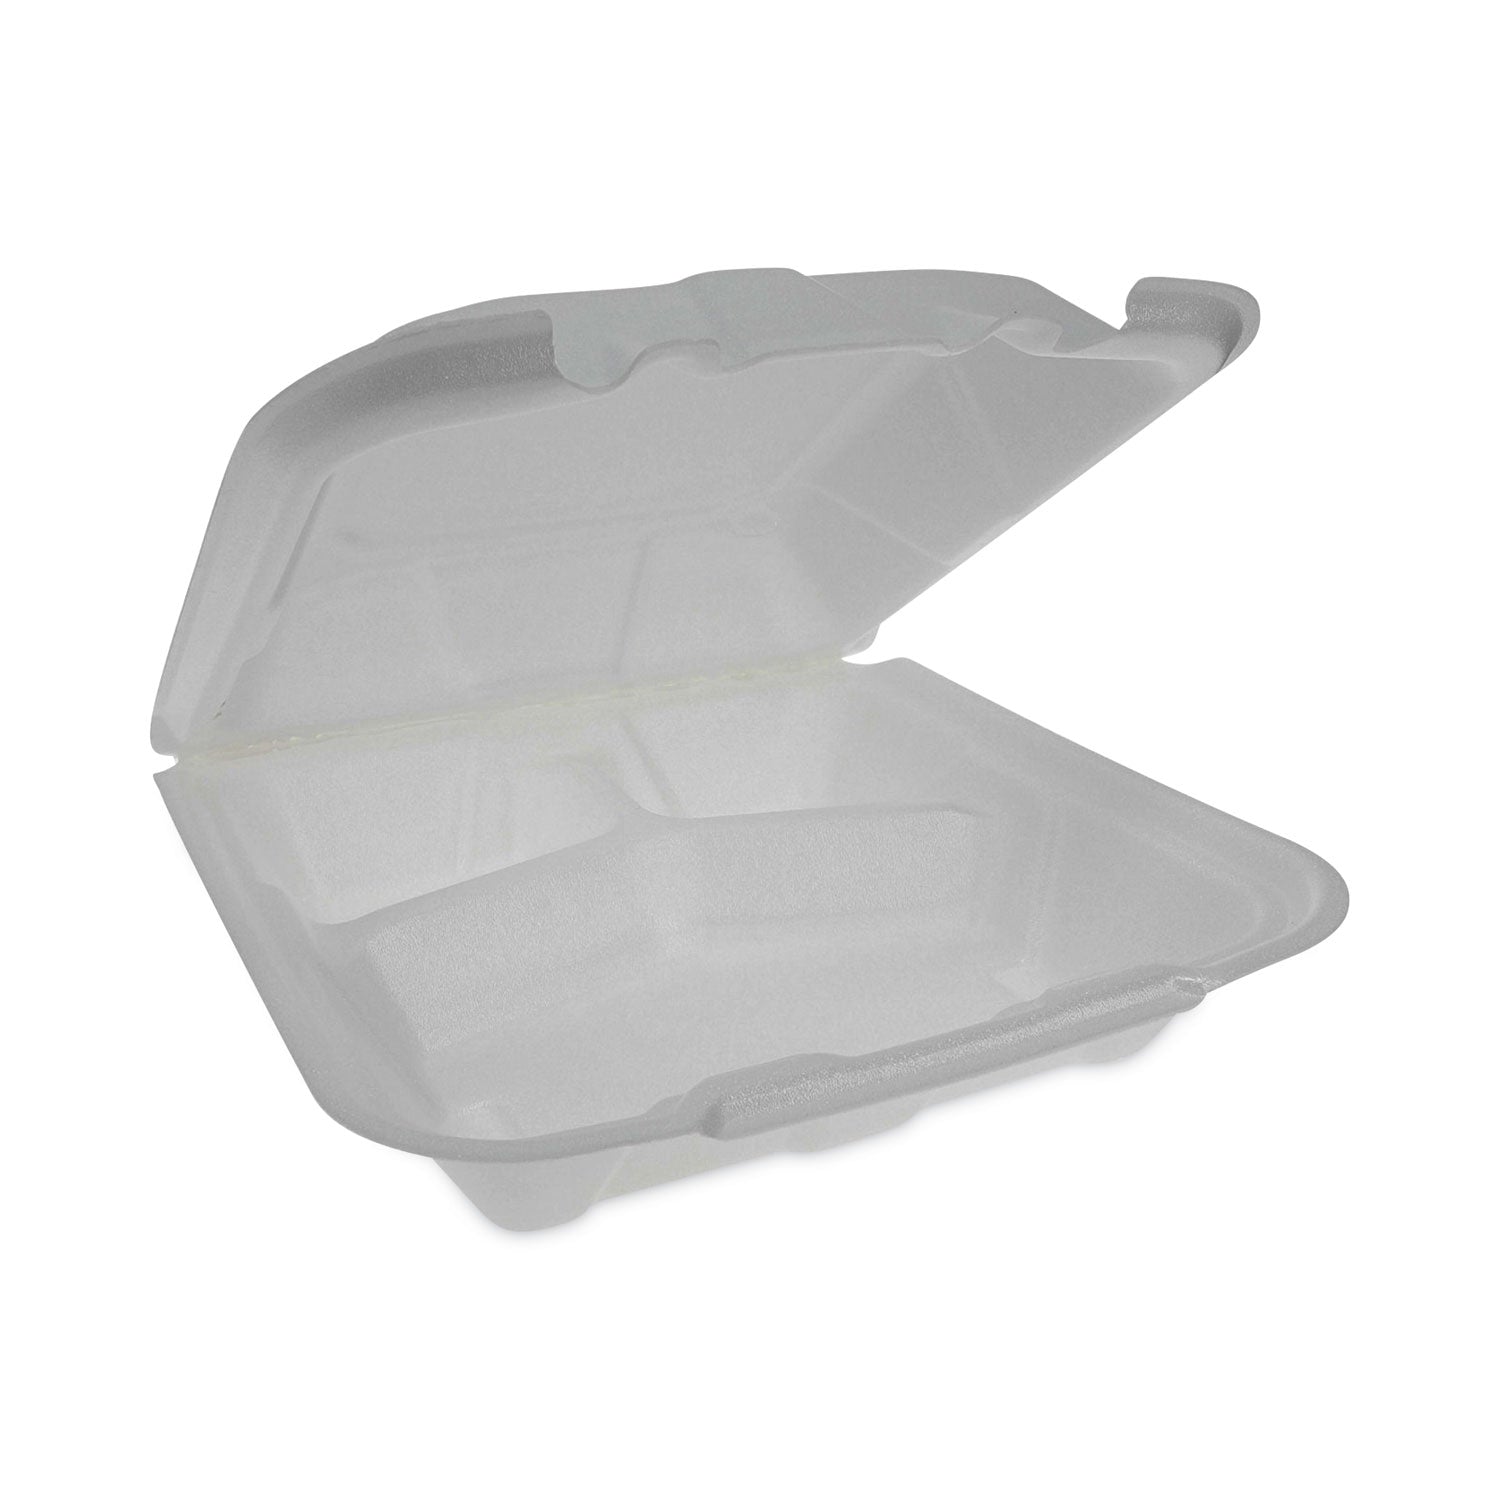 vented-foam-hinged-lid-container-dual-tab-lock-economy-3-compartment-913-x-9-x-325-white-150-carton_pctytd19903econ - 2